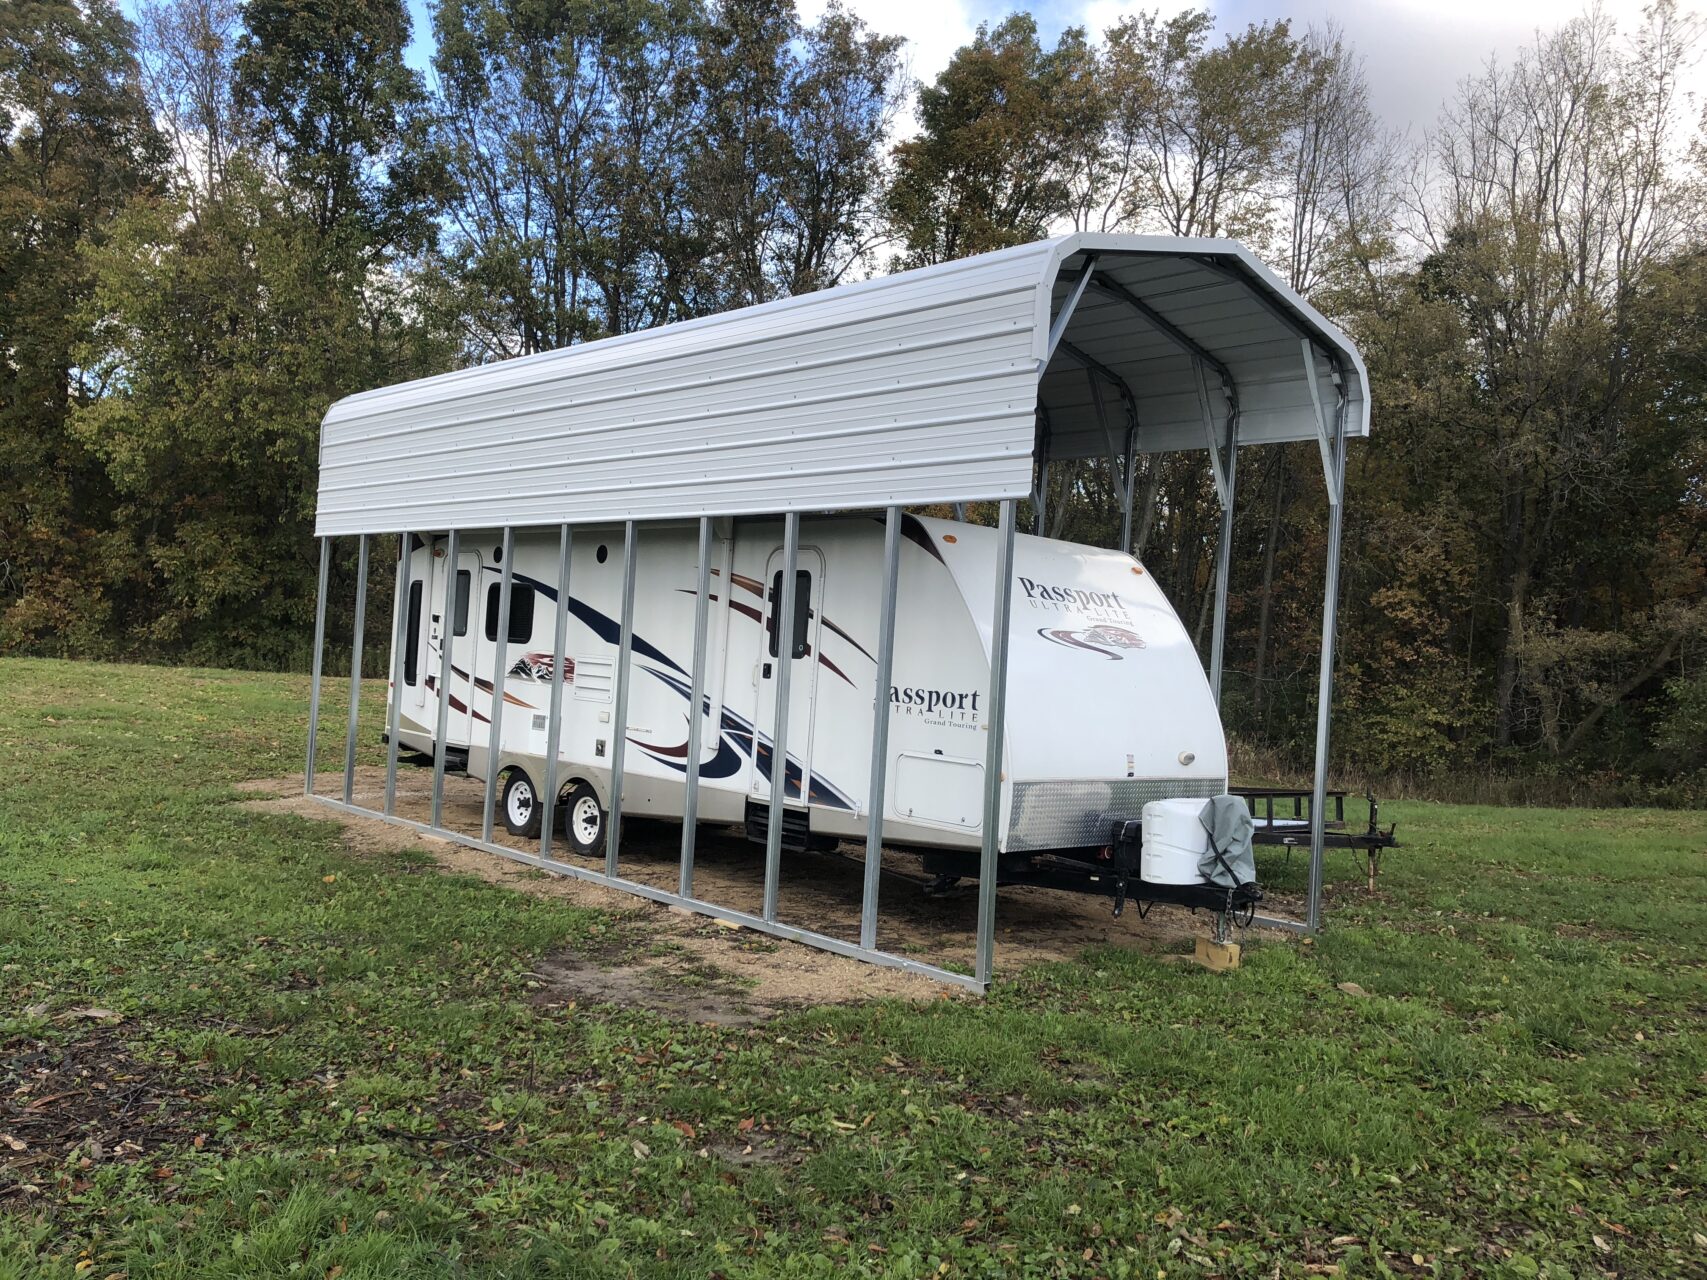 sheds for travel trailers